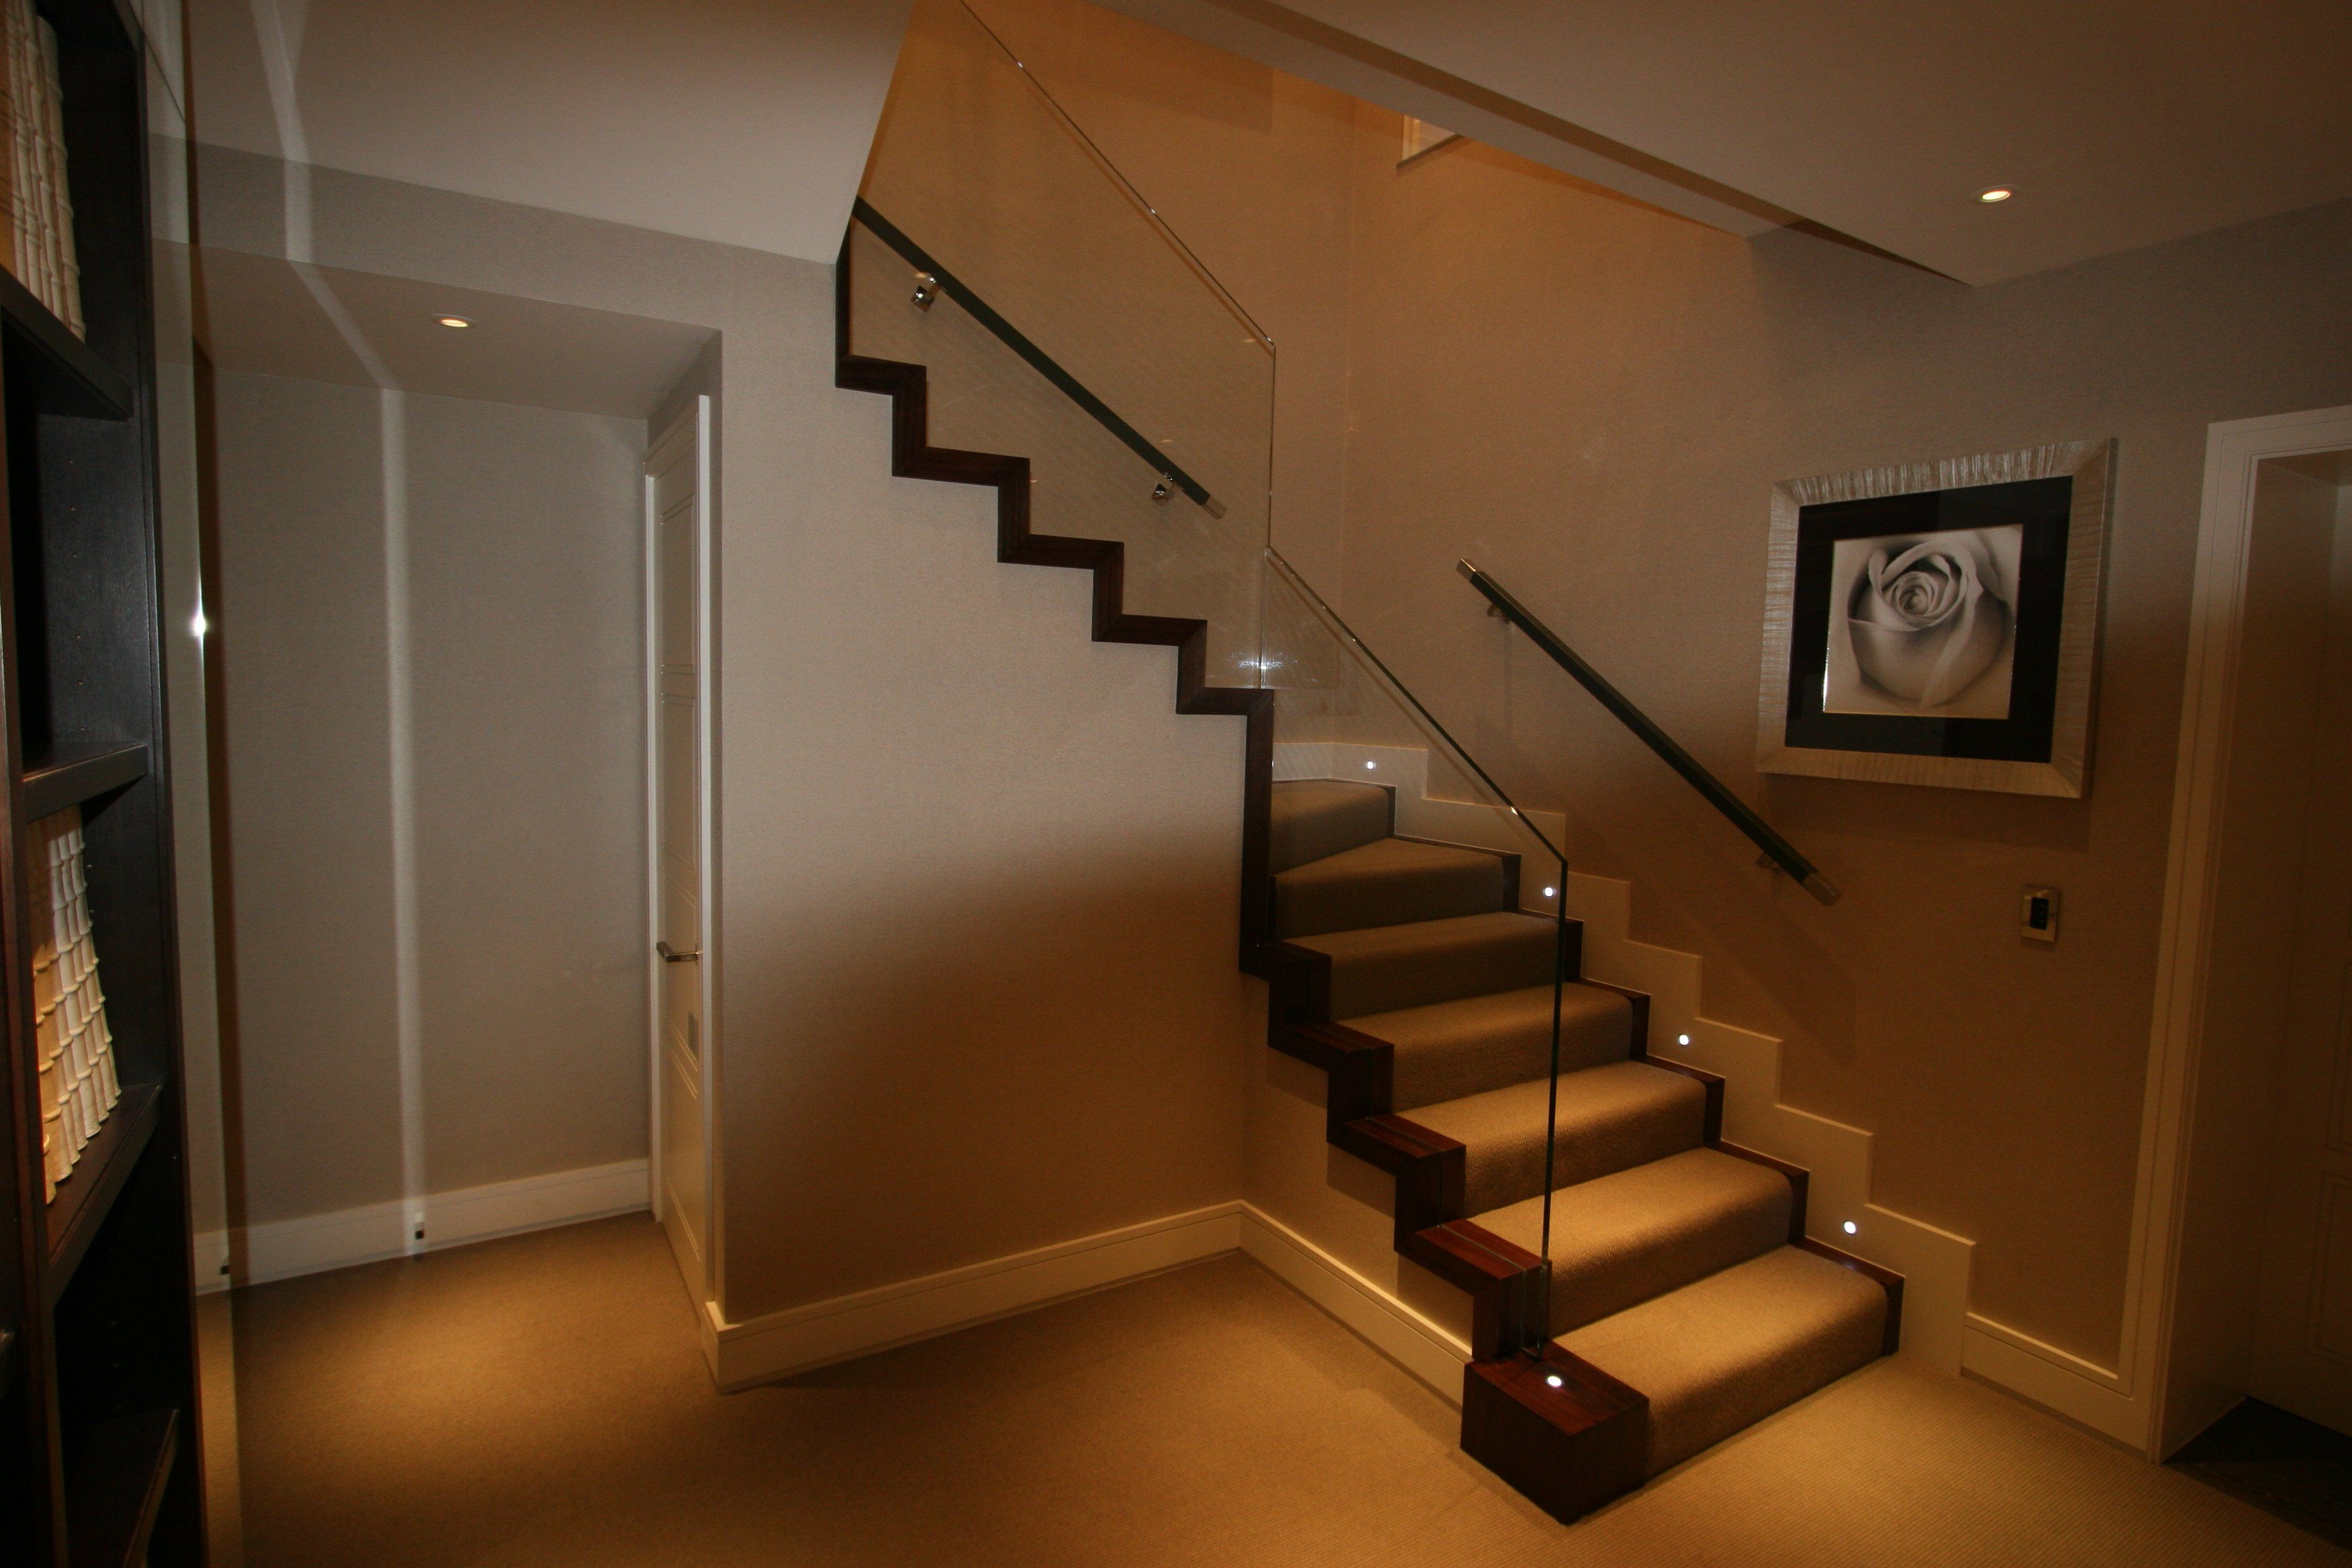 17 Light Stairs Ideas You Can Start Using Today Staircase Design Decorating Stairway Walls